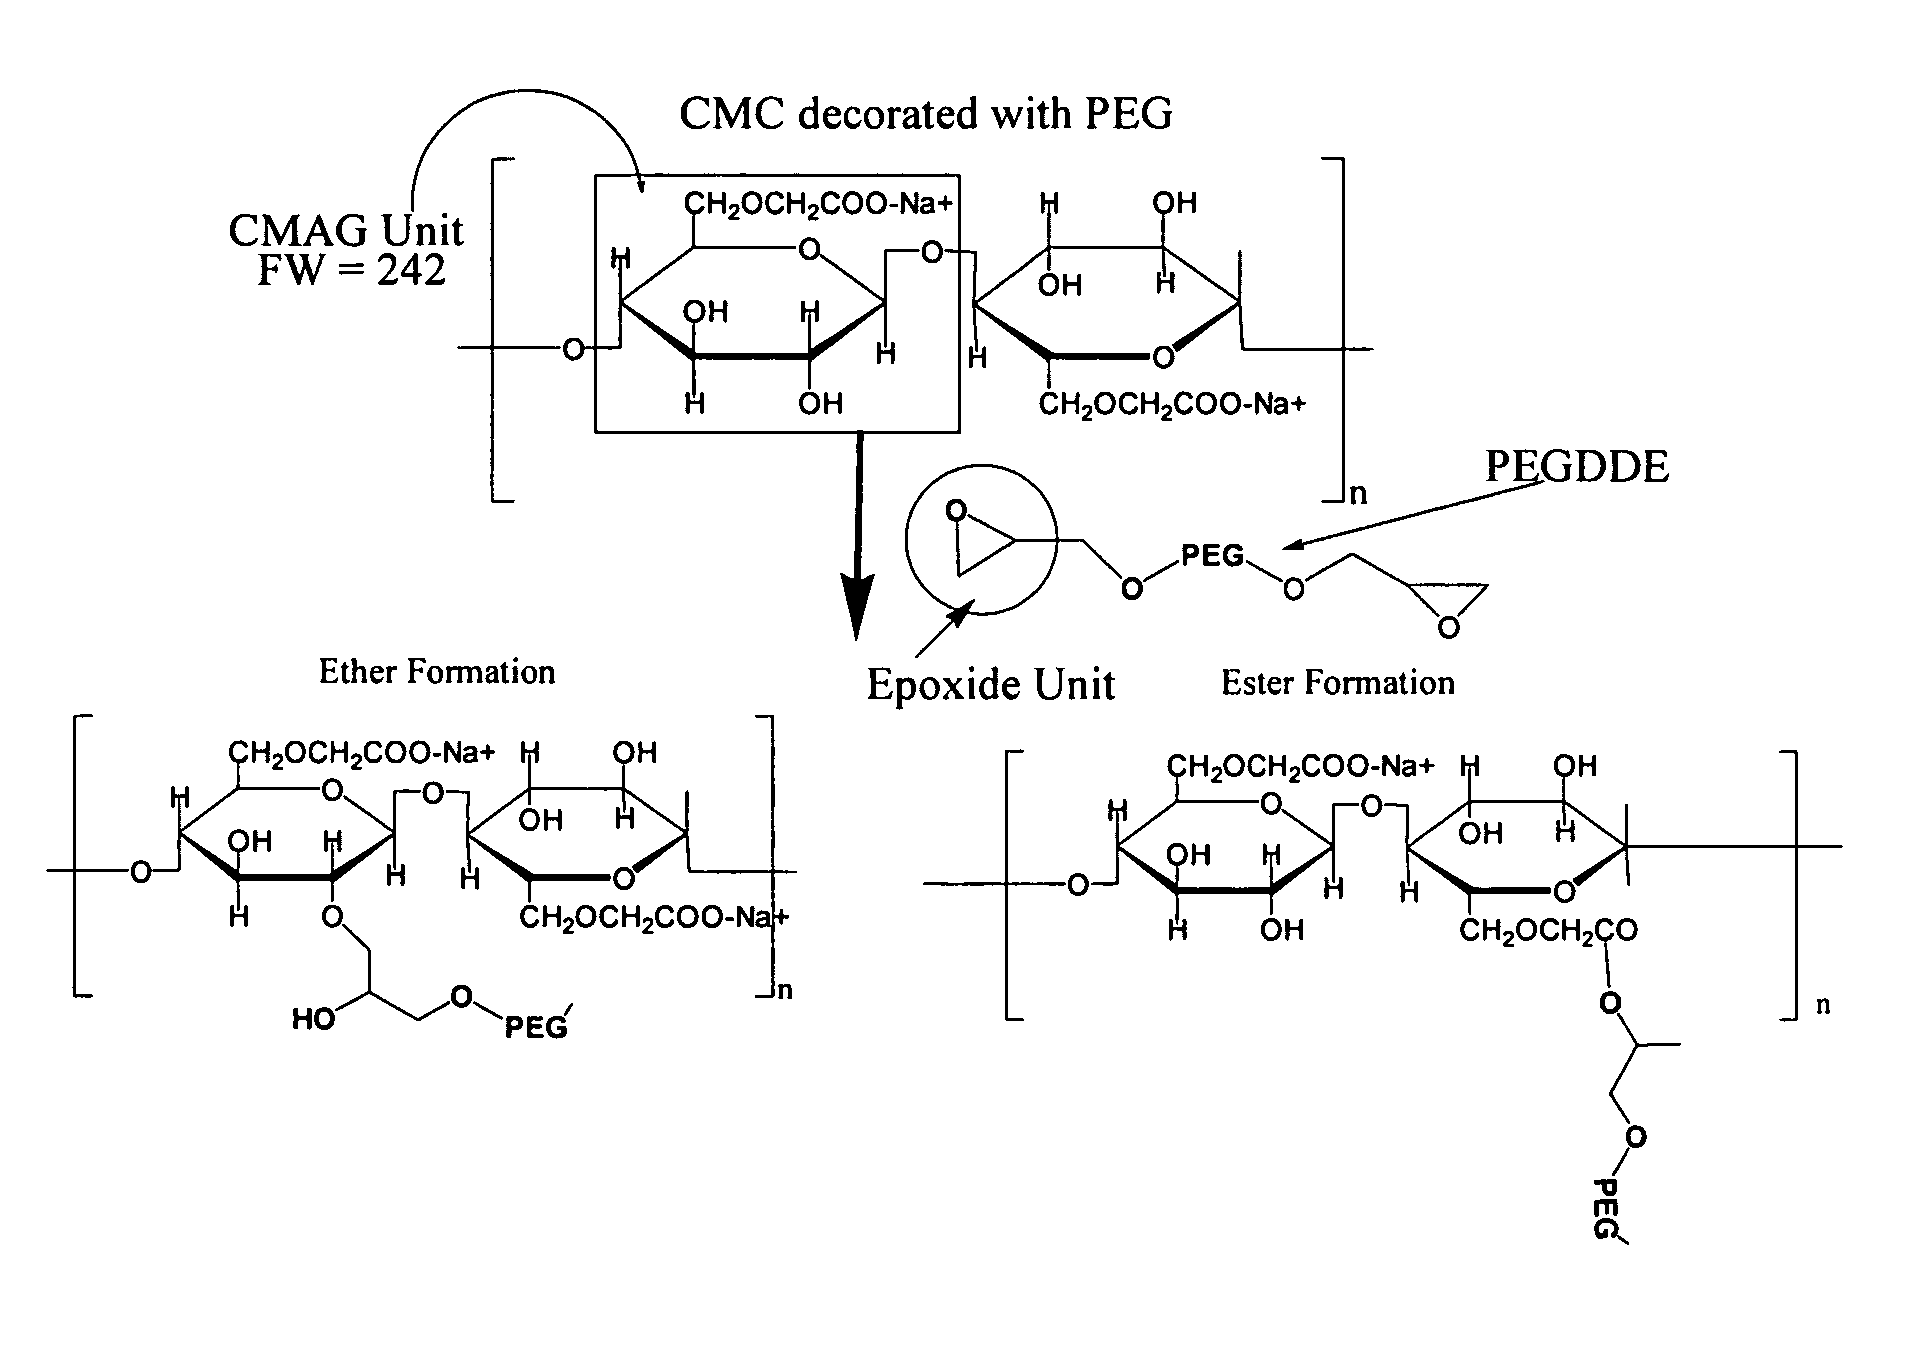 Carboxymethylcellulose polyethylene glycol compositions for medical uses